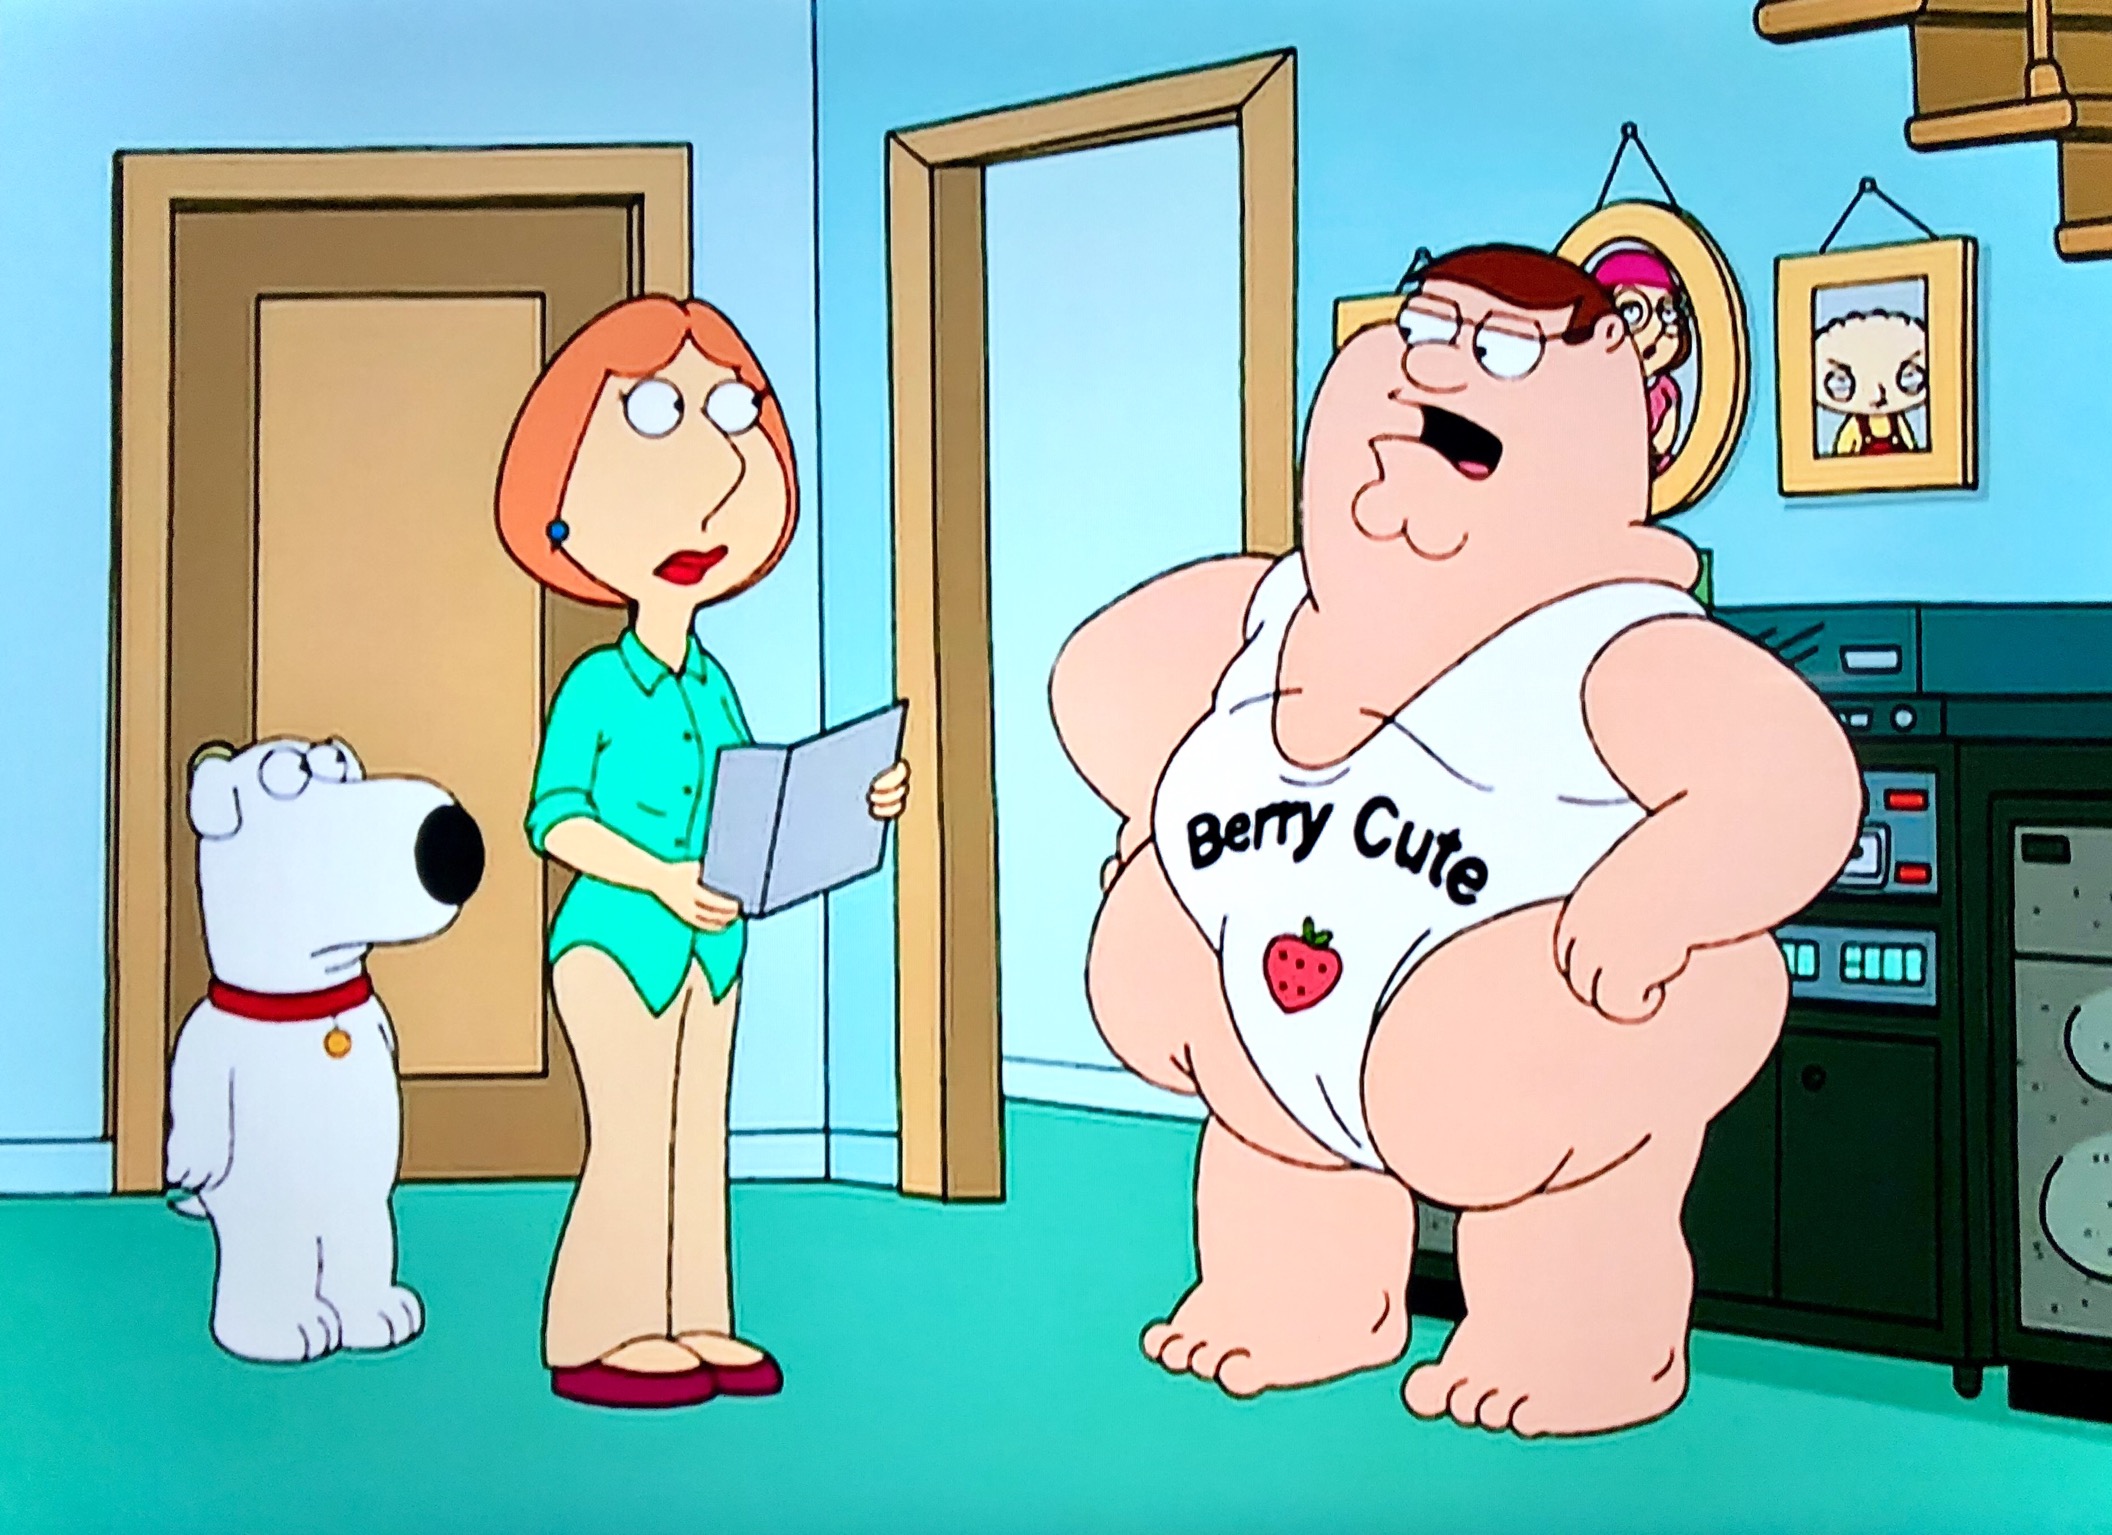 Sex tih louis from family guy